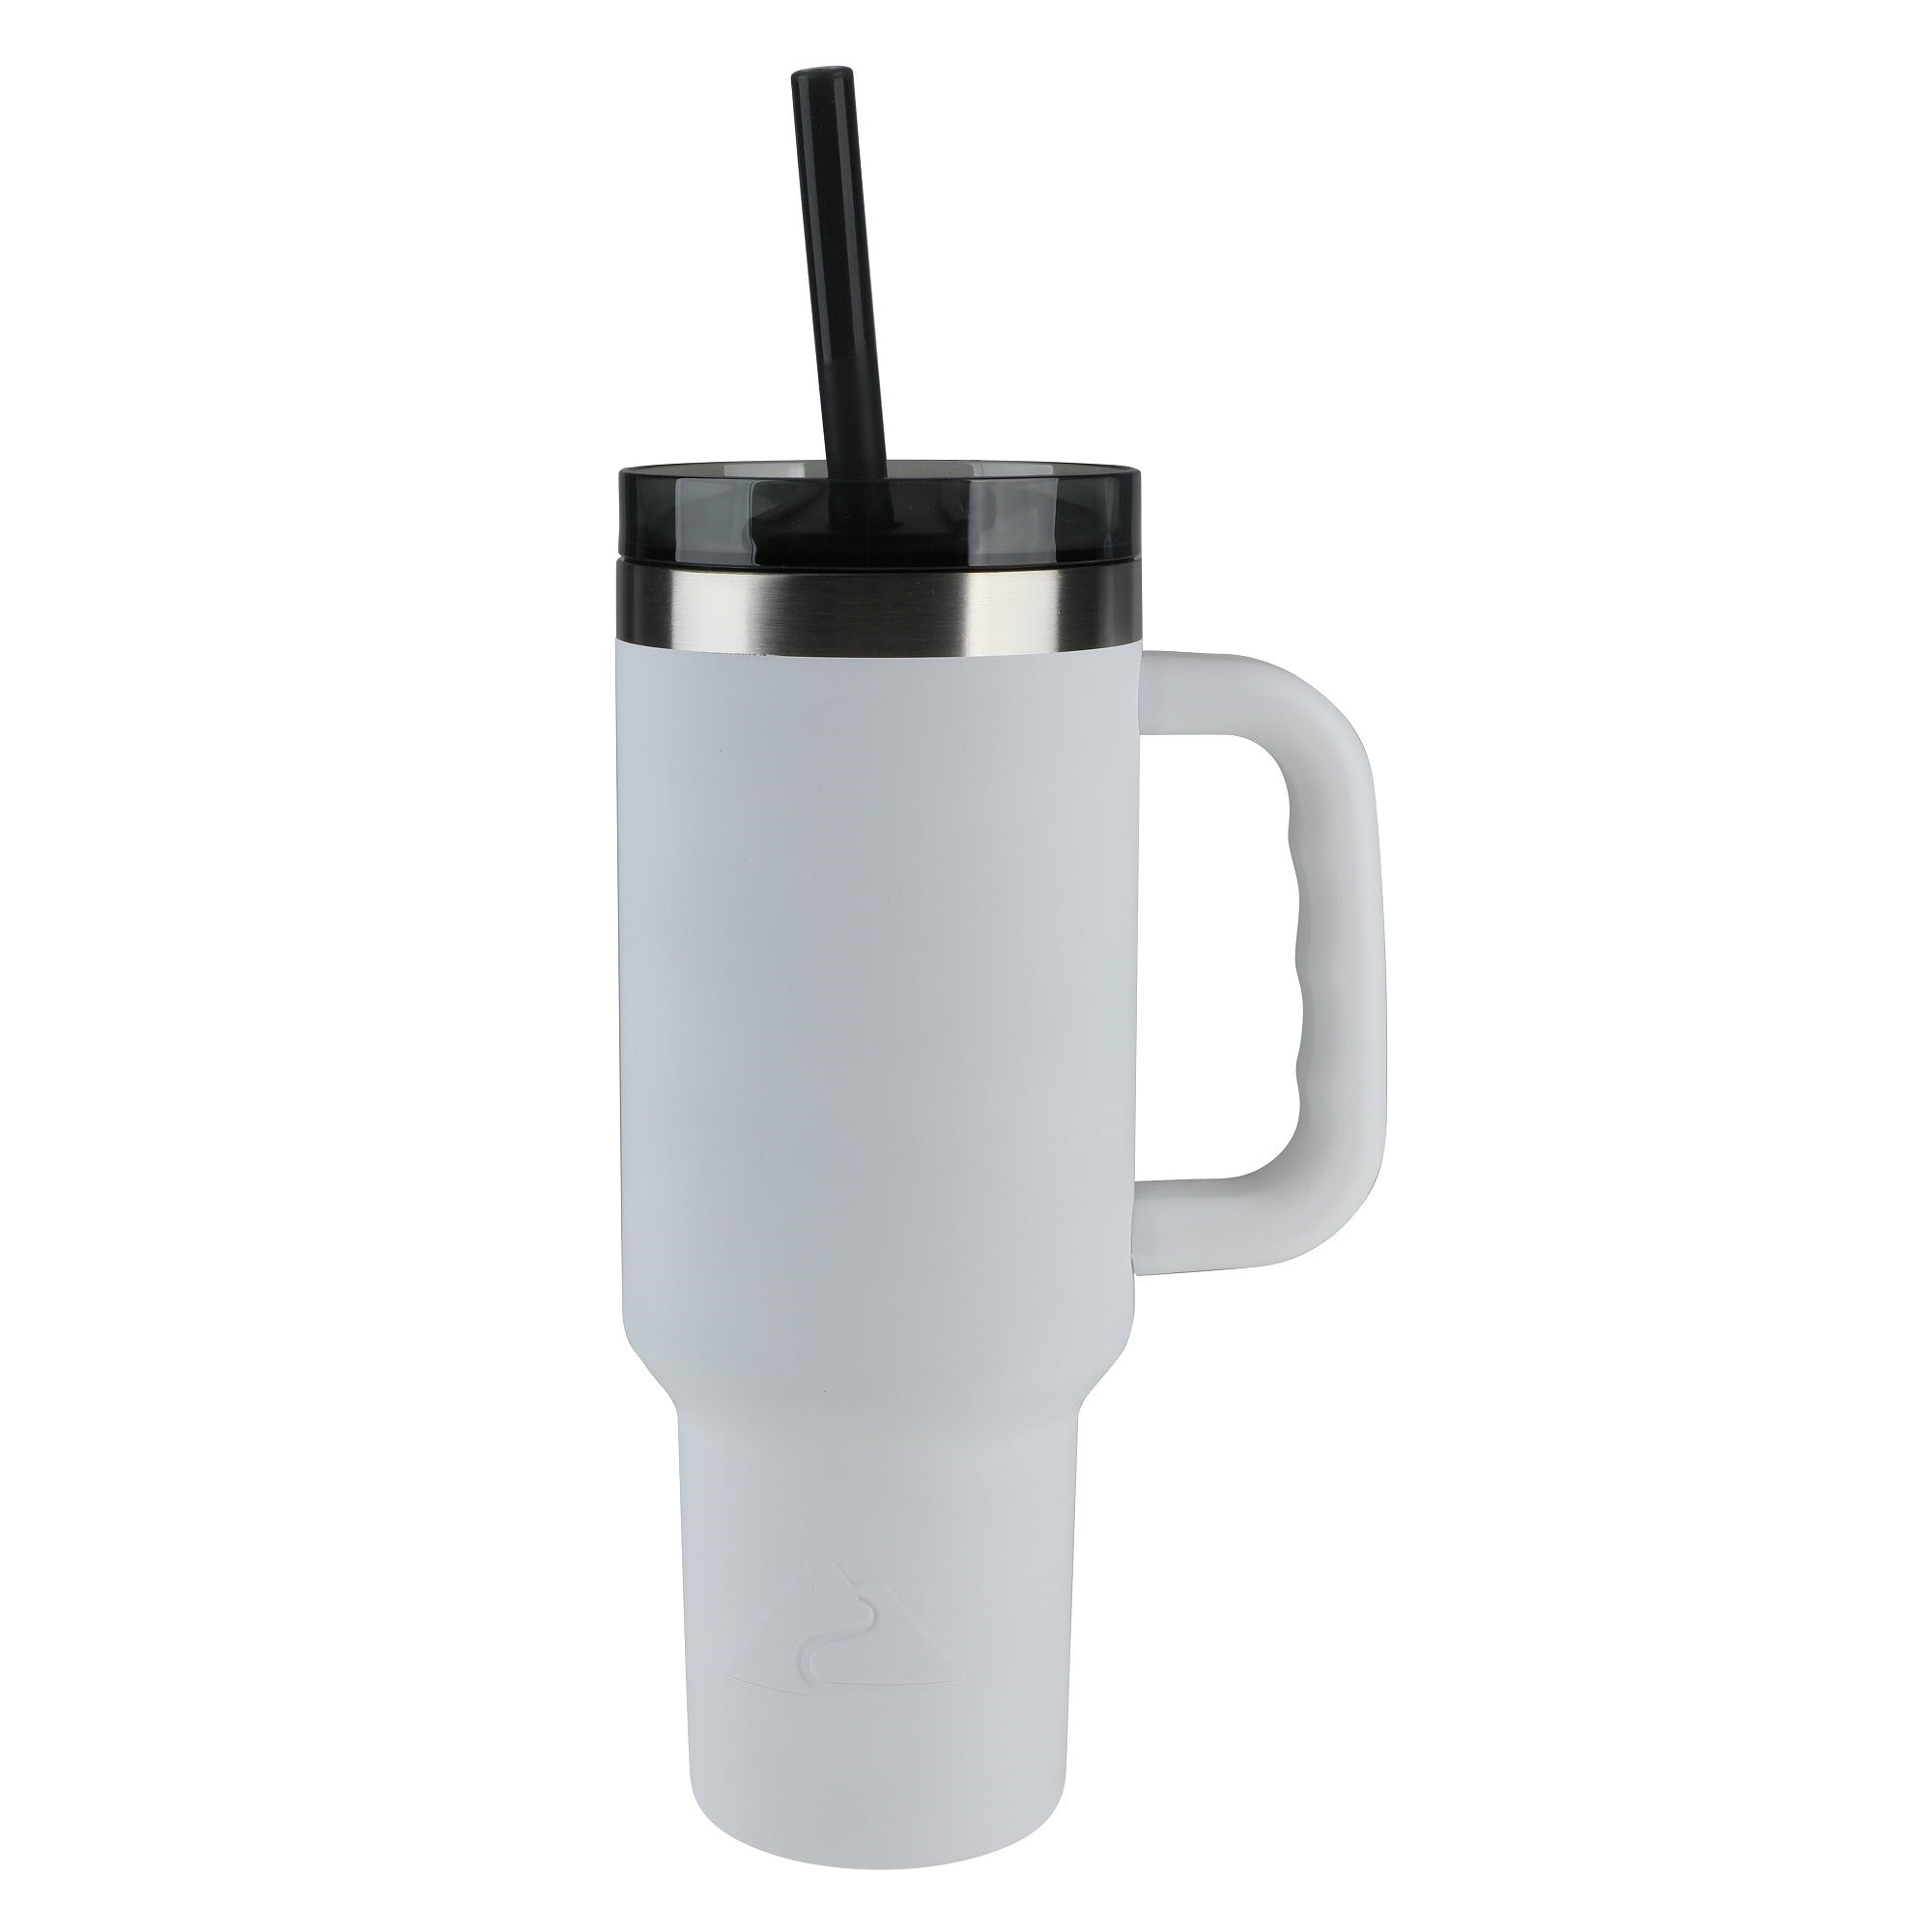 4 WIDE 40-Ounce Stainless Steel Straws (NO CUP) for 40 oz Ozark Trail  Double-Wall Rambler Vacuum Cups - CocoStraw Brand Drinking Straw (4 Straws  40oz)